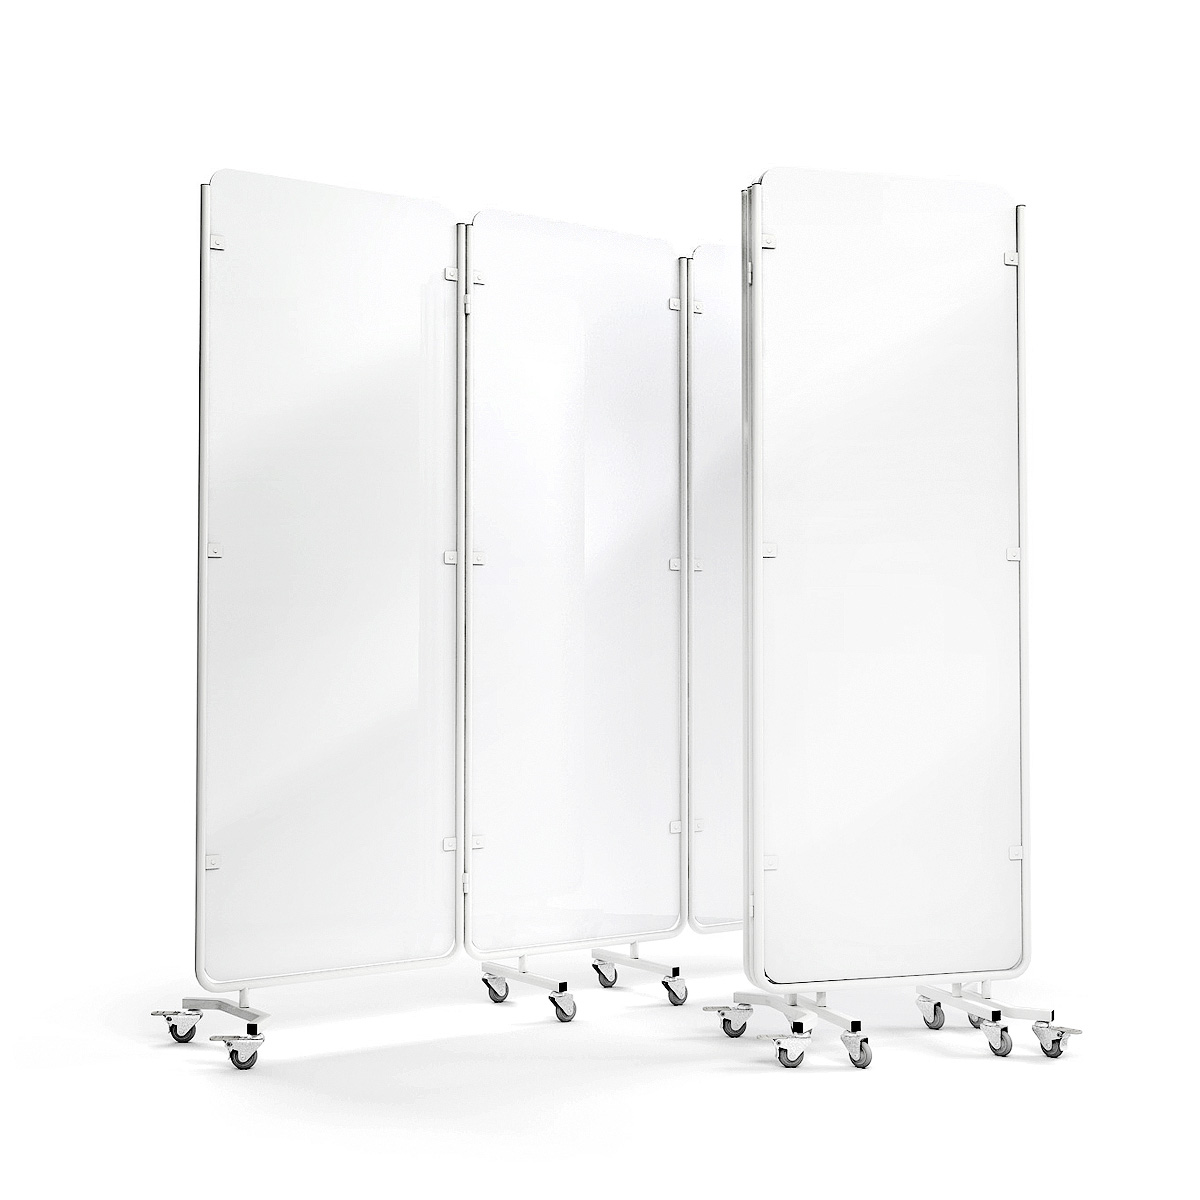 DIGNITY® PLUS Hospital Privacy Screens With 3 Folding Panels